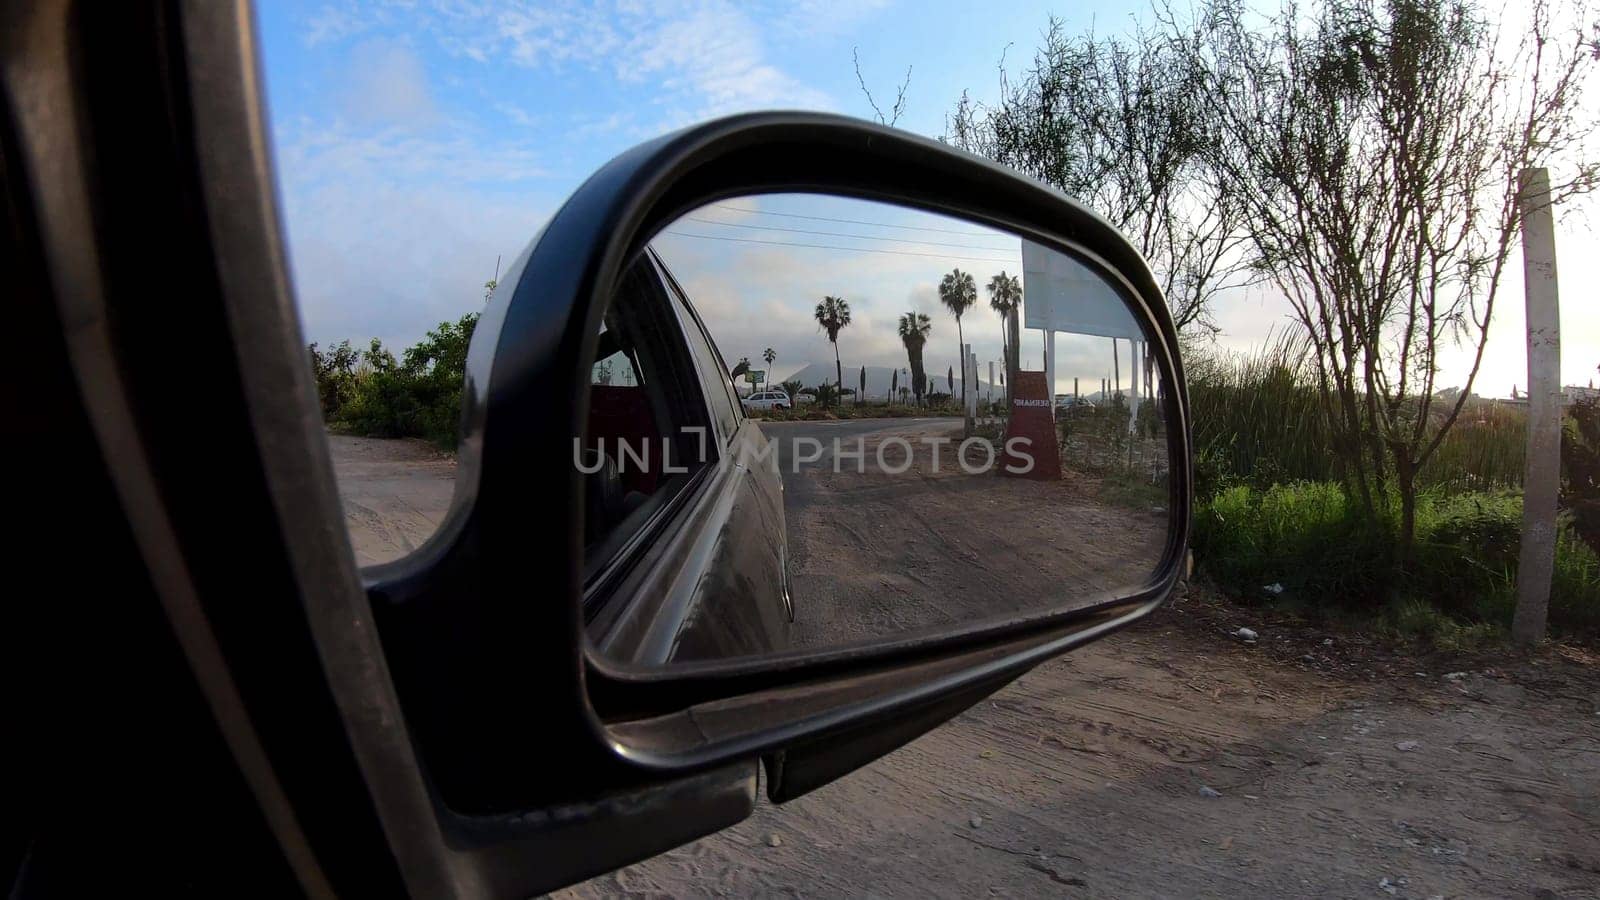 View of palm trees and a sunny day through the rearview mirror of a car. by Peruphotoart